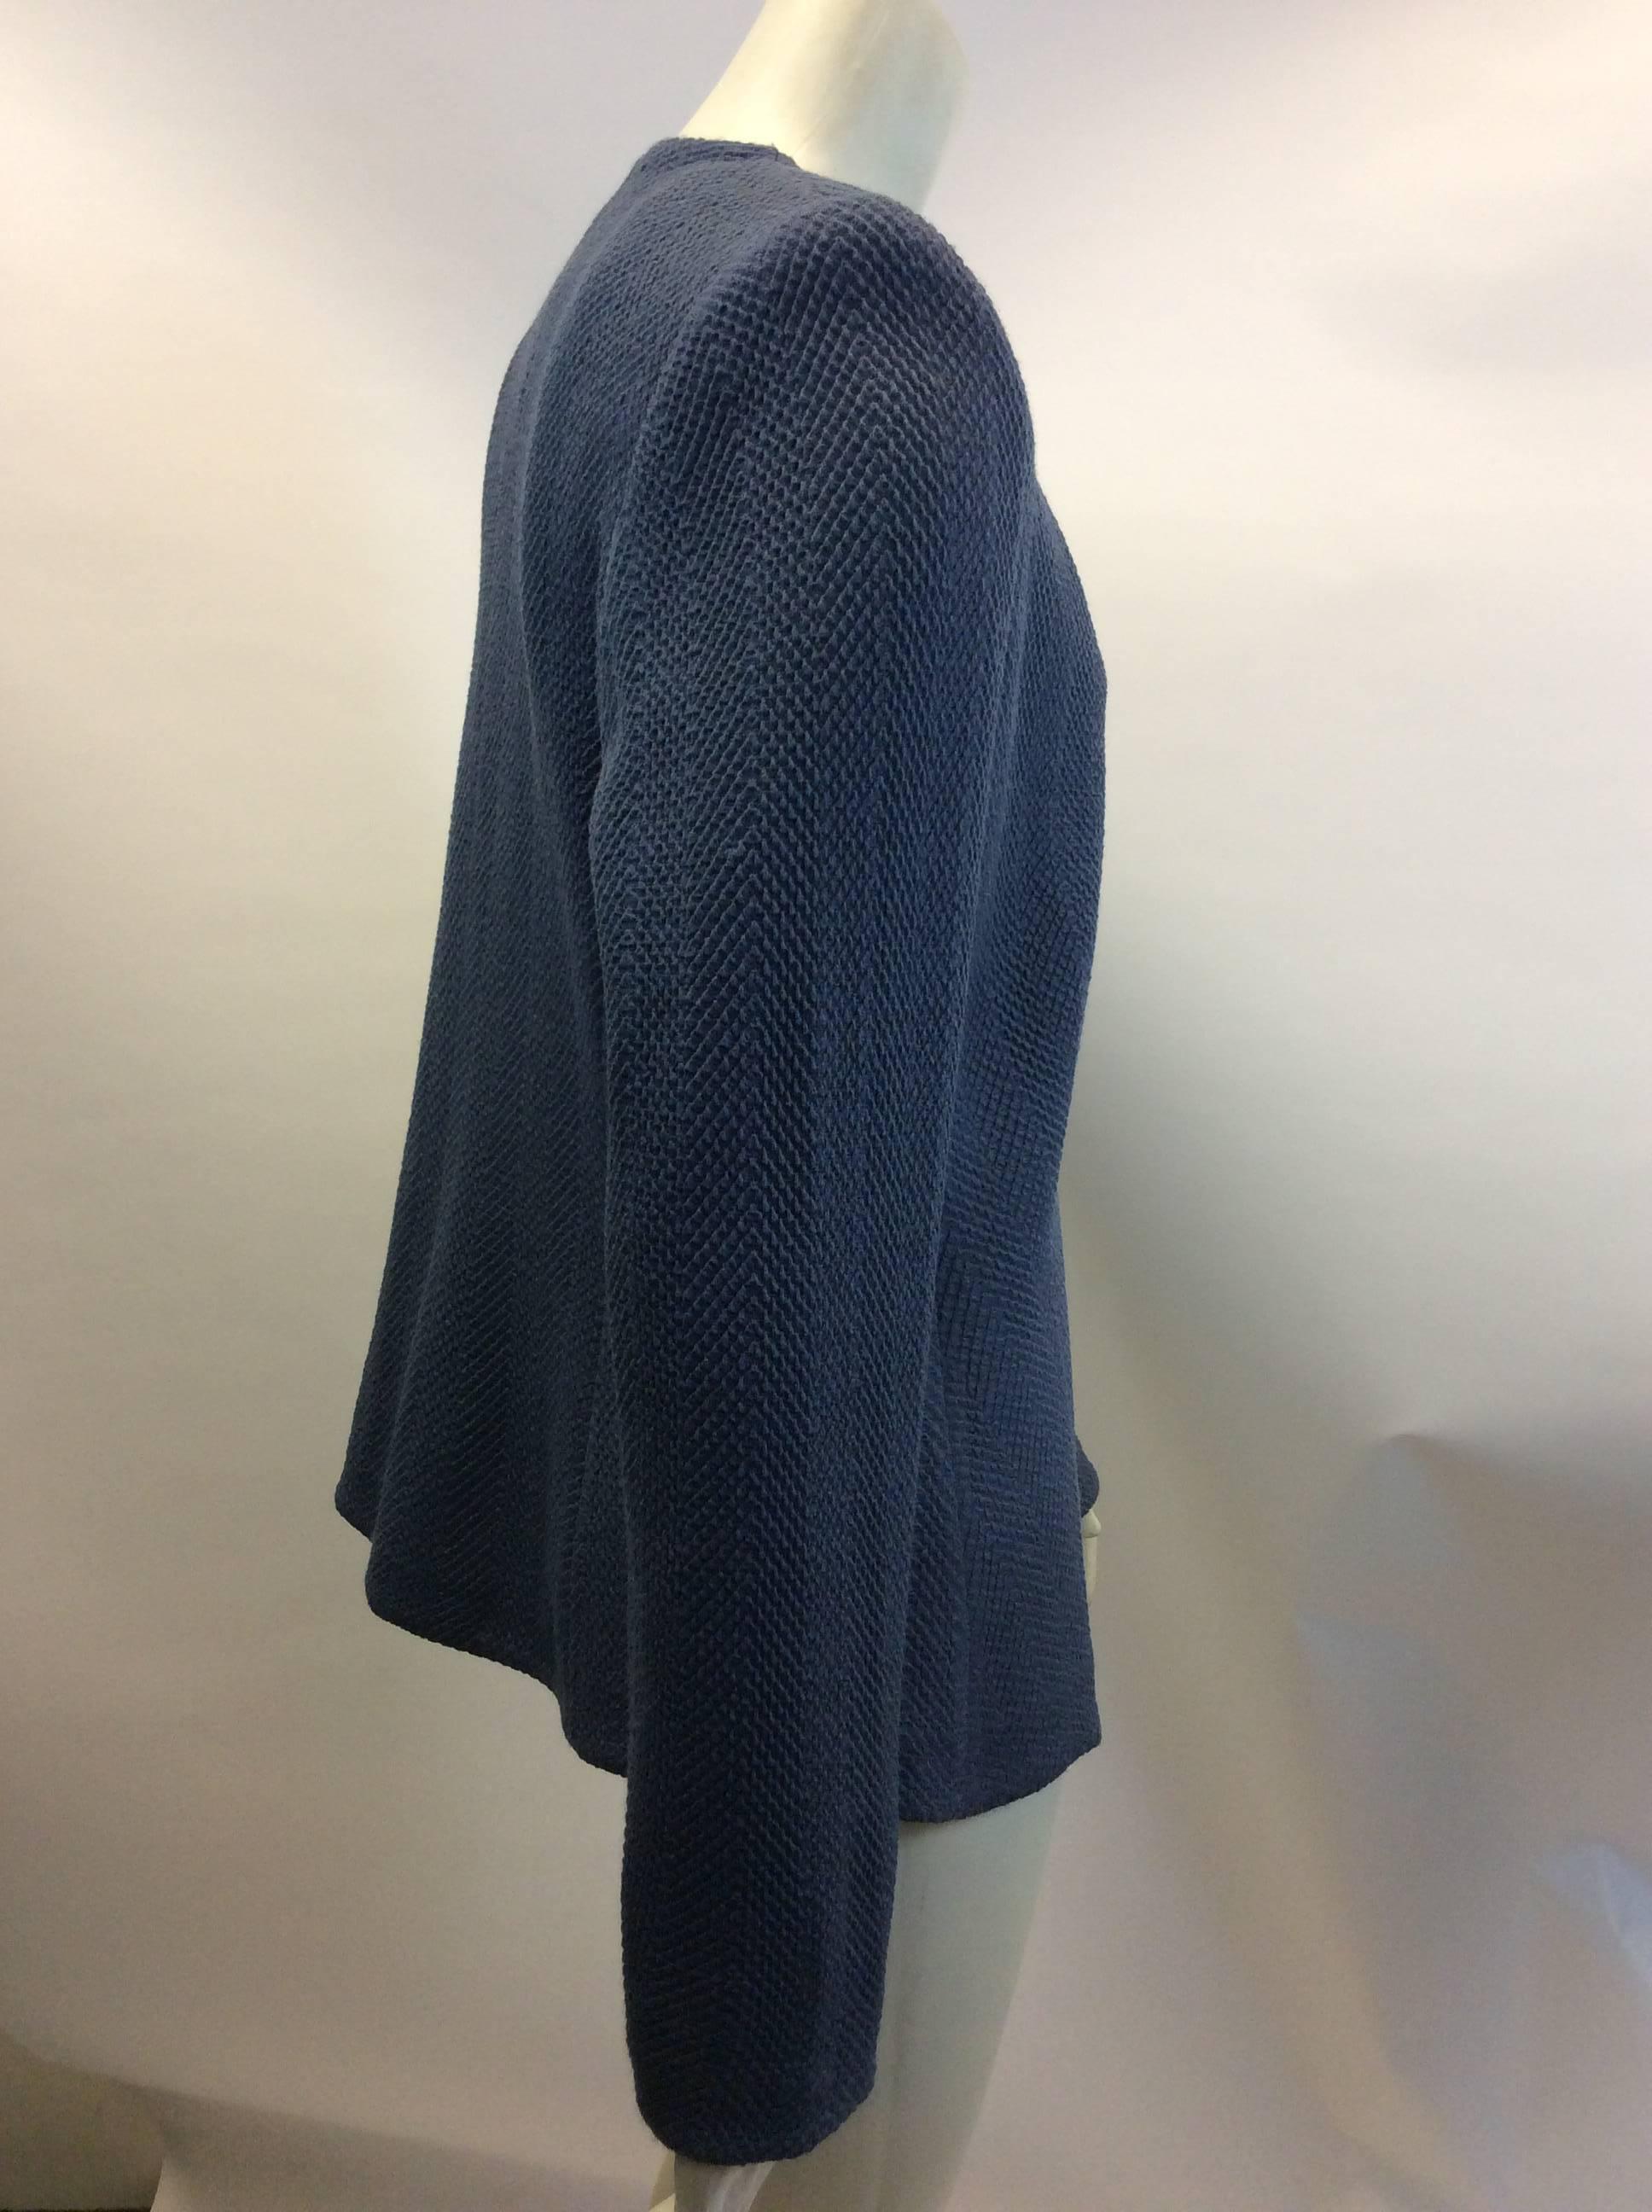 Armani Blue Bow Jacket In Excellent Condition For Sale In Narberth, PA